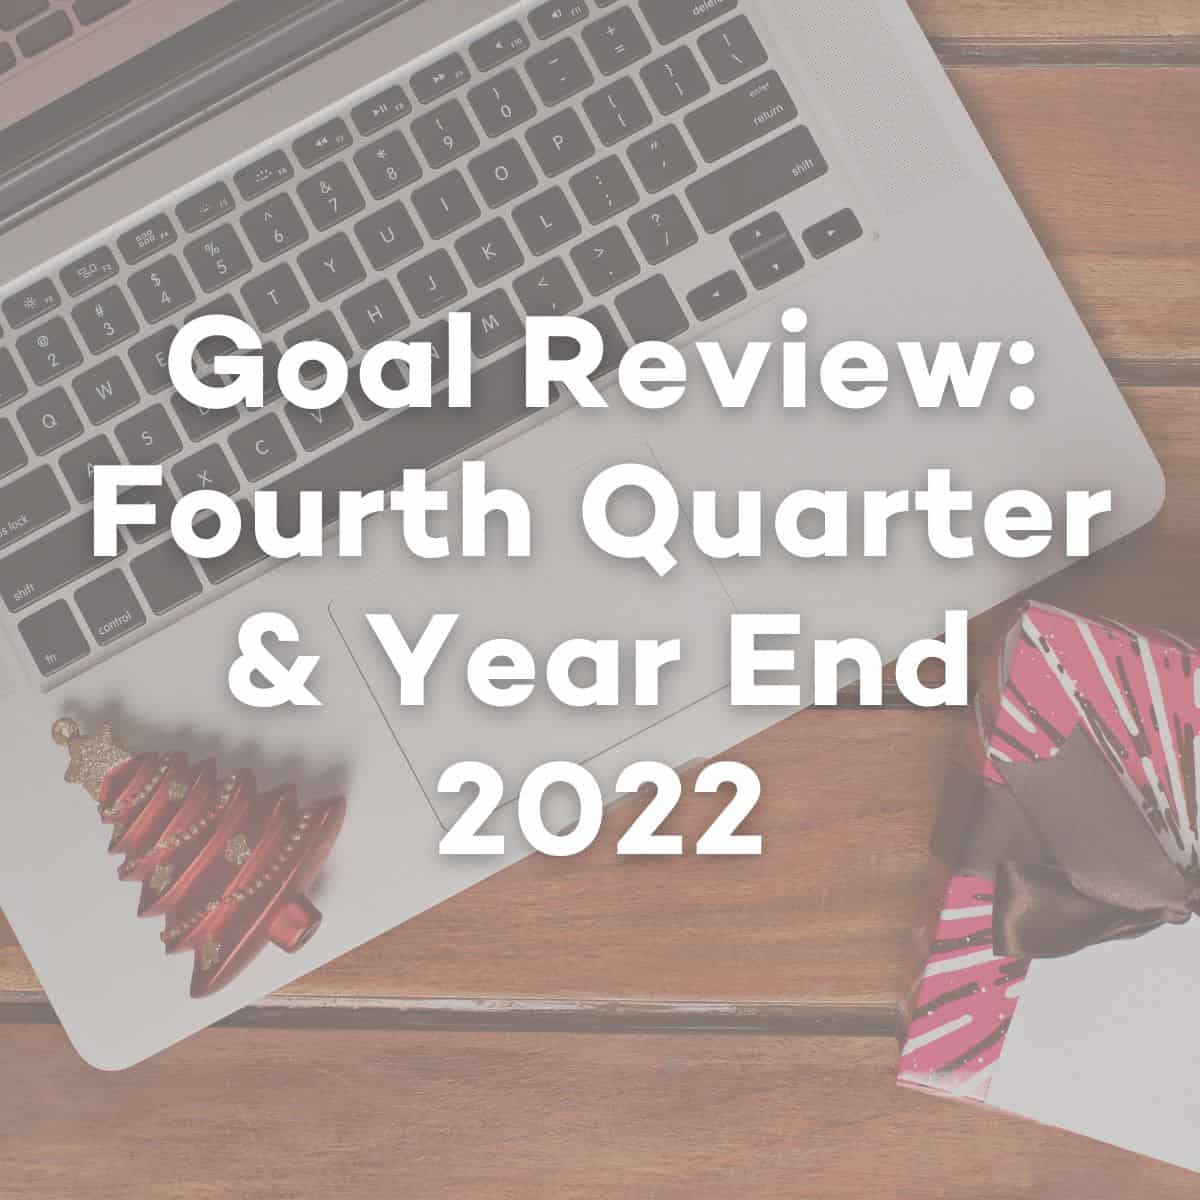 Goal Review: Fourth Quarter and Year End 2022.